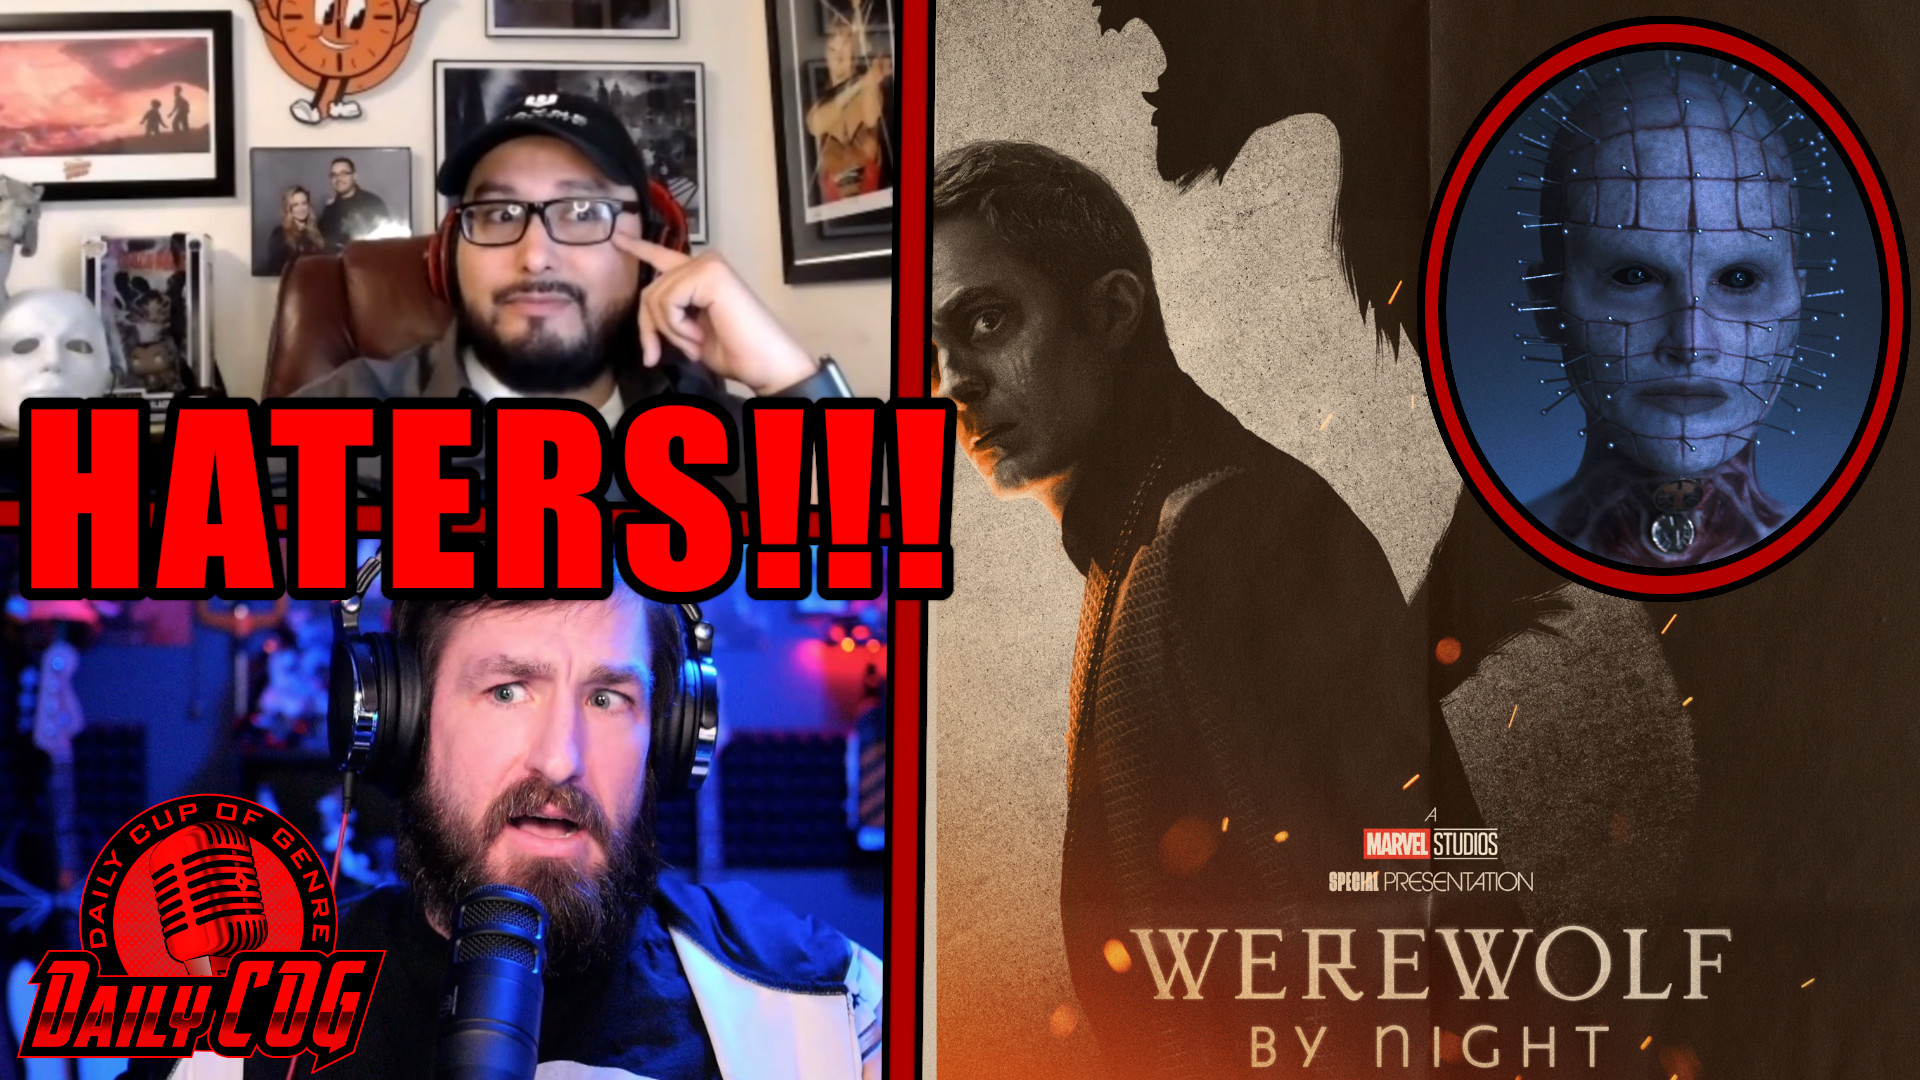 He-Man Woman Haters-React To Werewolf By Night & Hellraiser | Daily COG